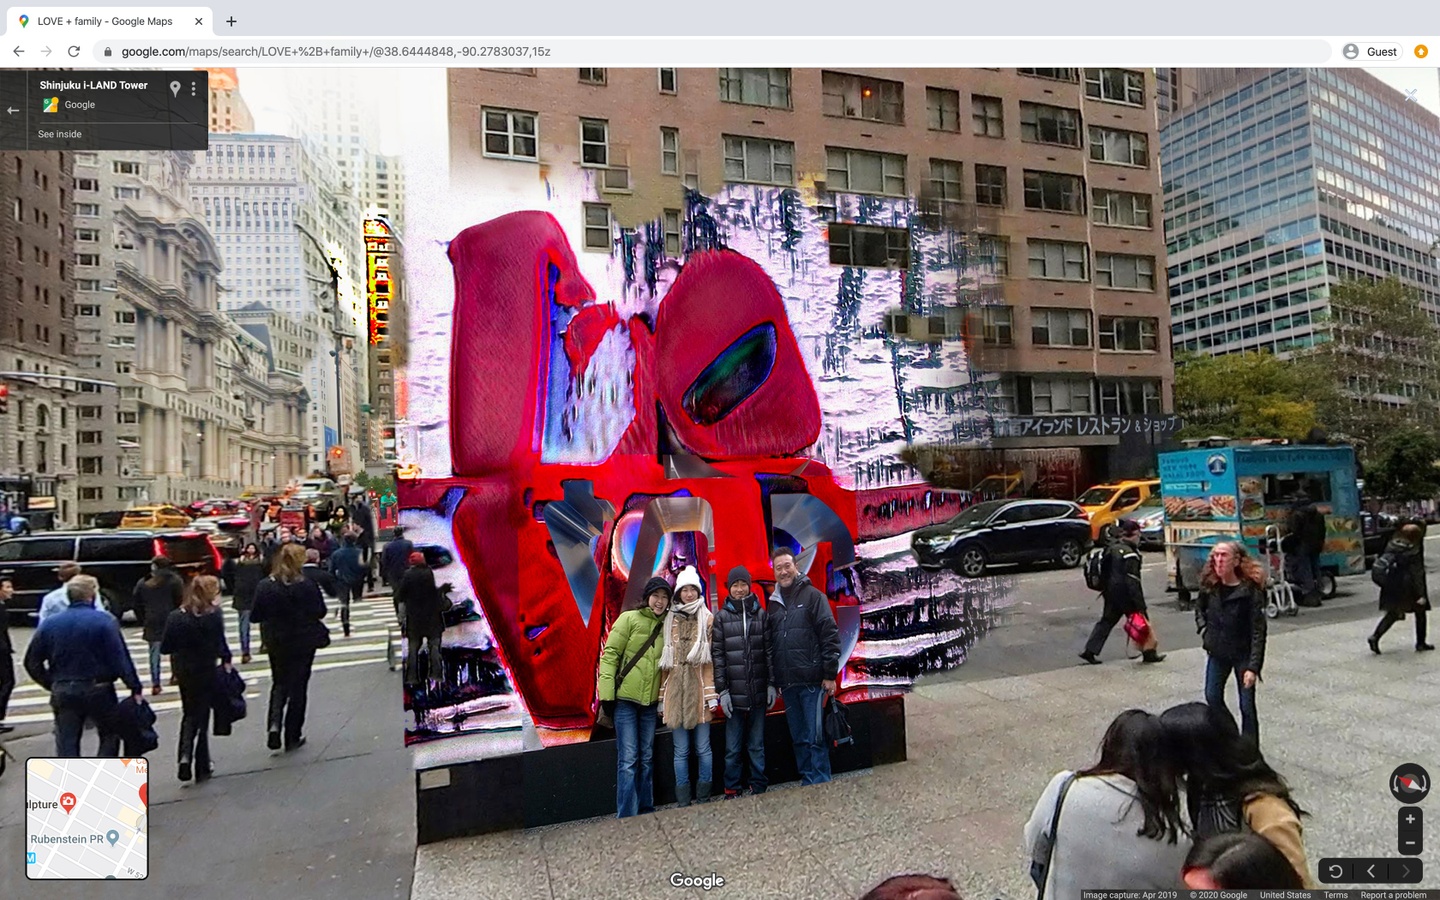 Screencap of Google Street View of tourists posing for a photo in front of a Robert Indiana LOVE sculpture, digitally distorted around the sculpture and possibly comped from different city street views.